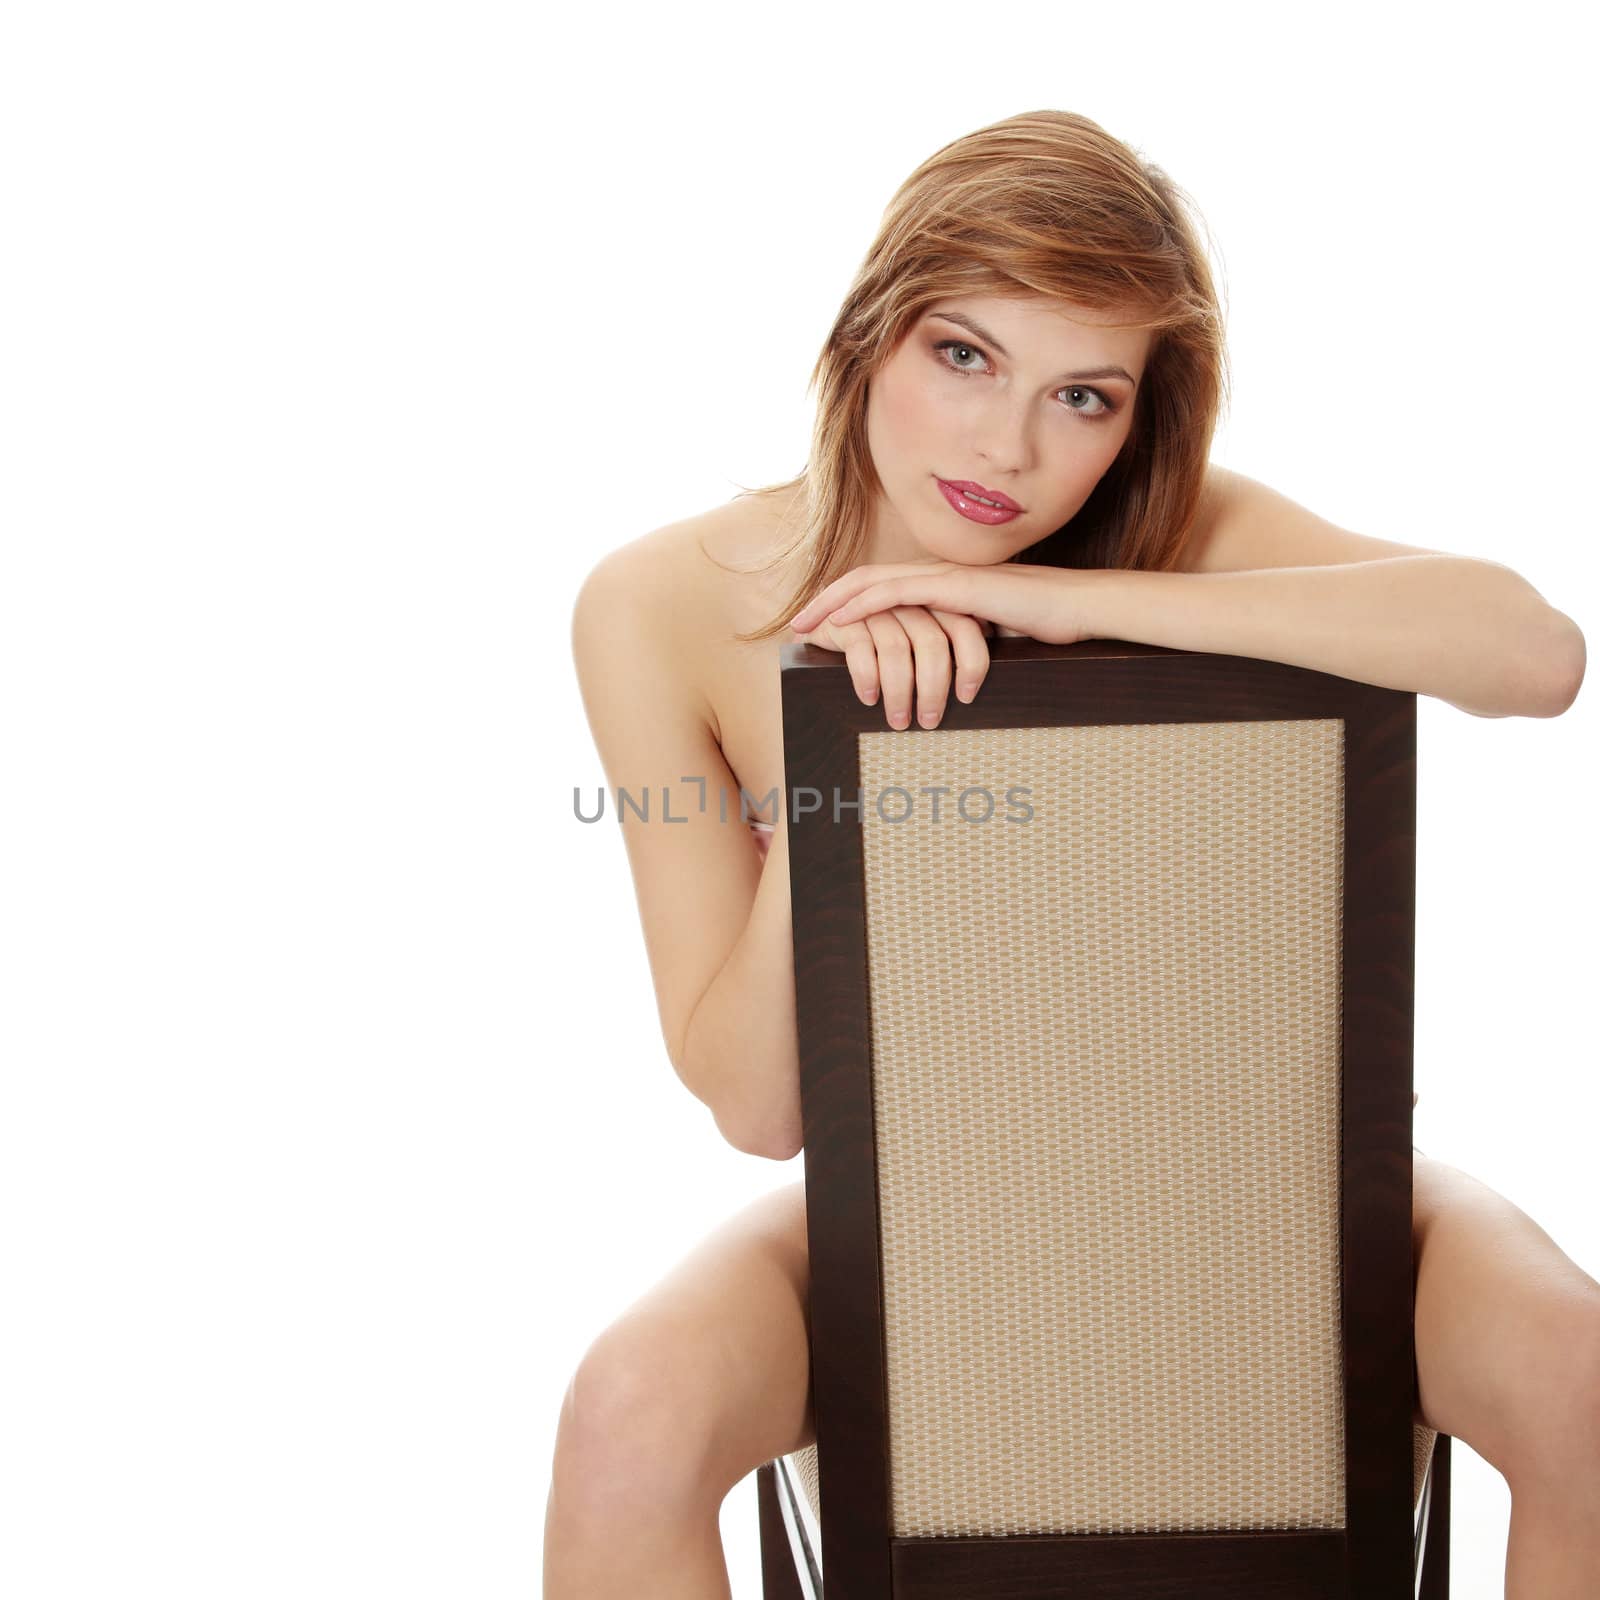 Teen girl in elegant make-up sitting on chair, isolated on white